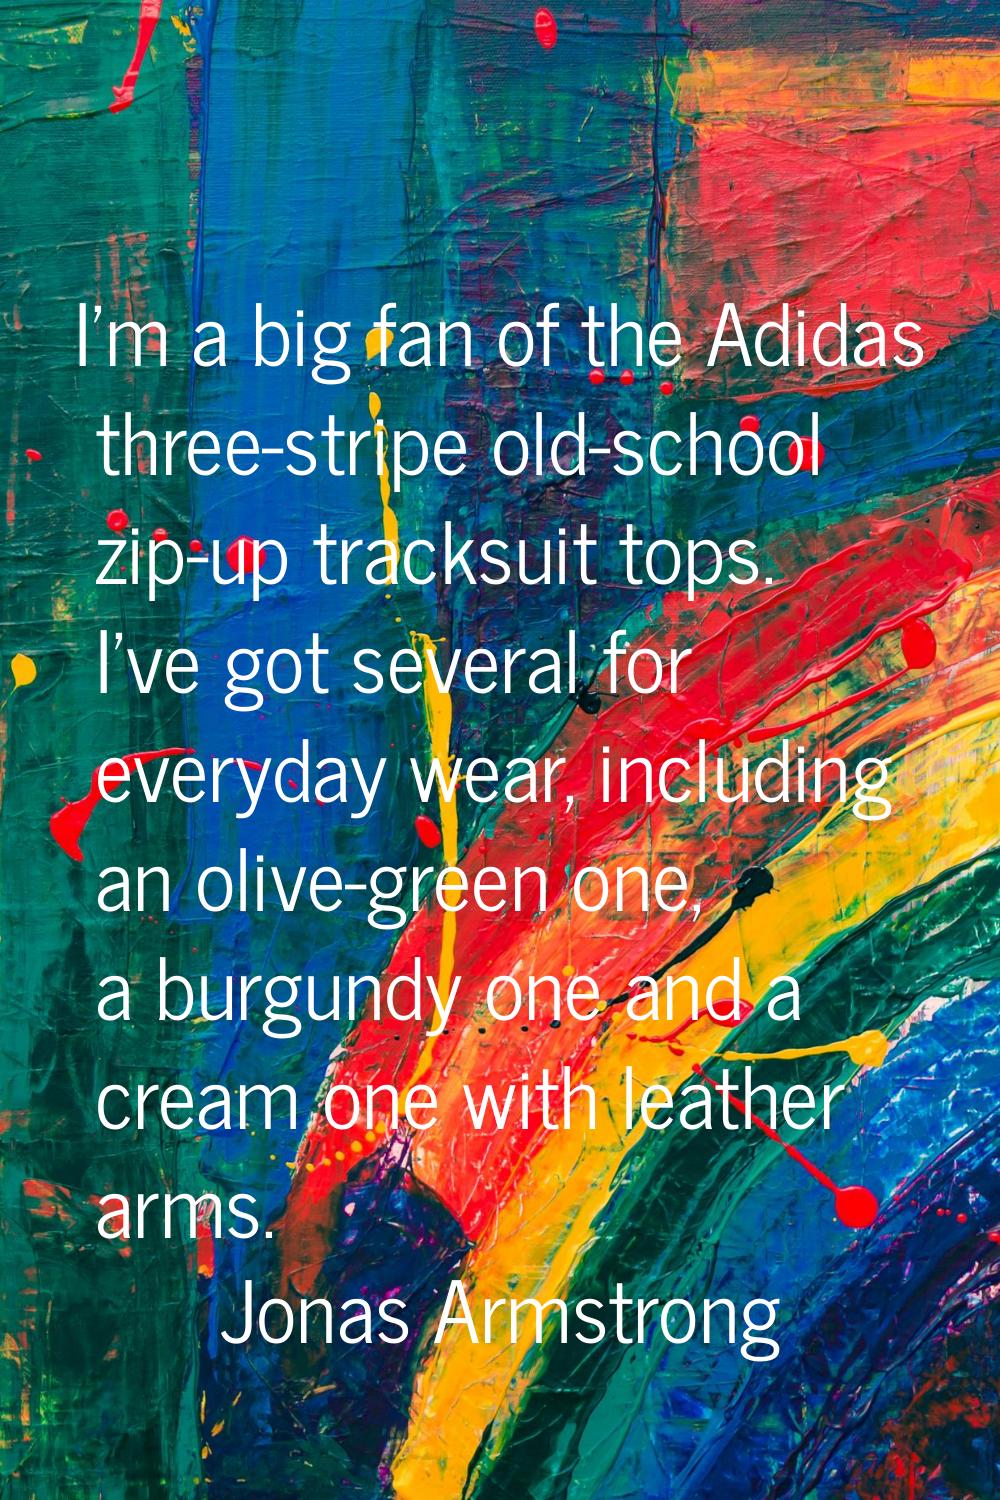 I'm a big fan of the Adidas three-stripe old-school zip-up tracksuit tops. I've got several for eve